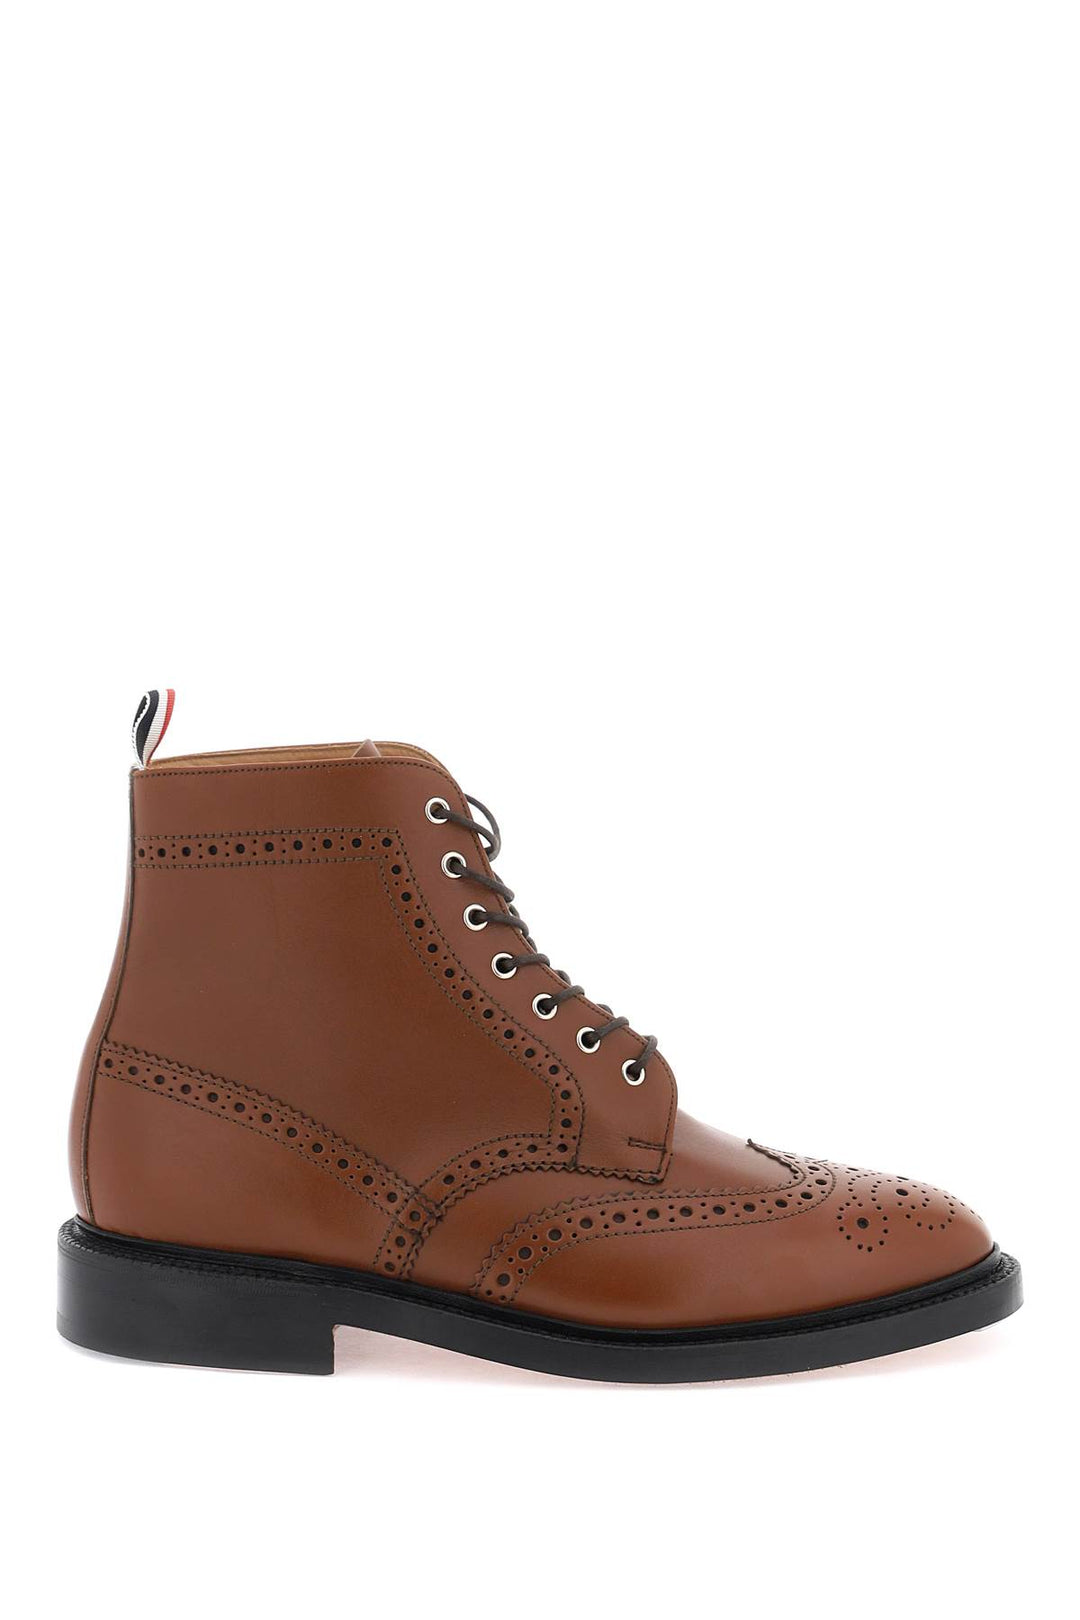 Thom Browne Wingtip Ankle Boots With Brogue Details   Brown